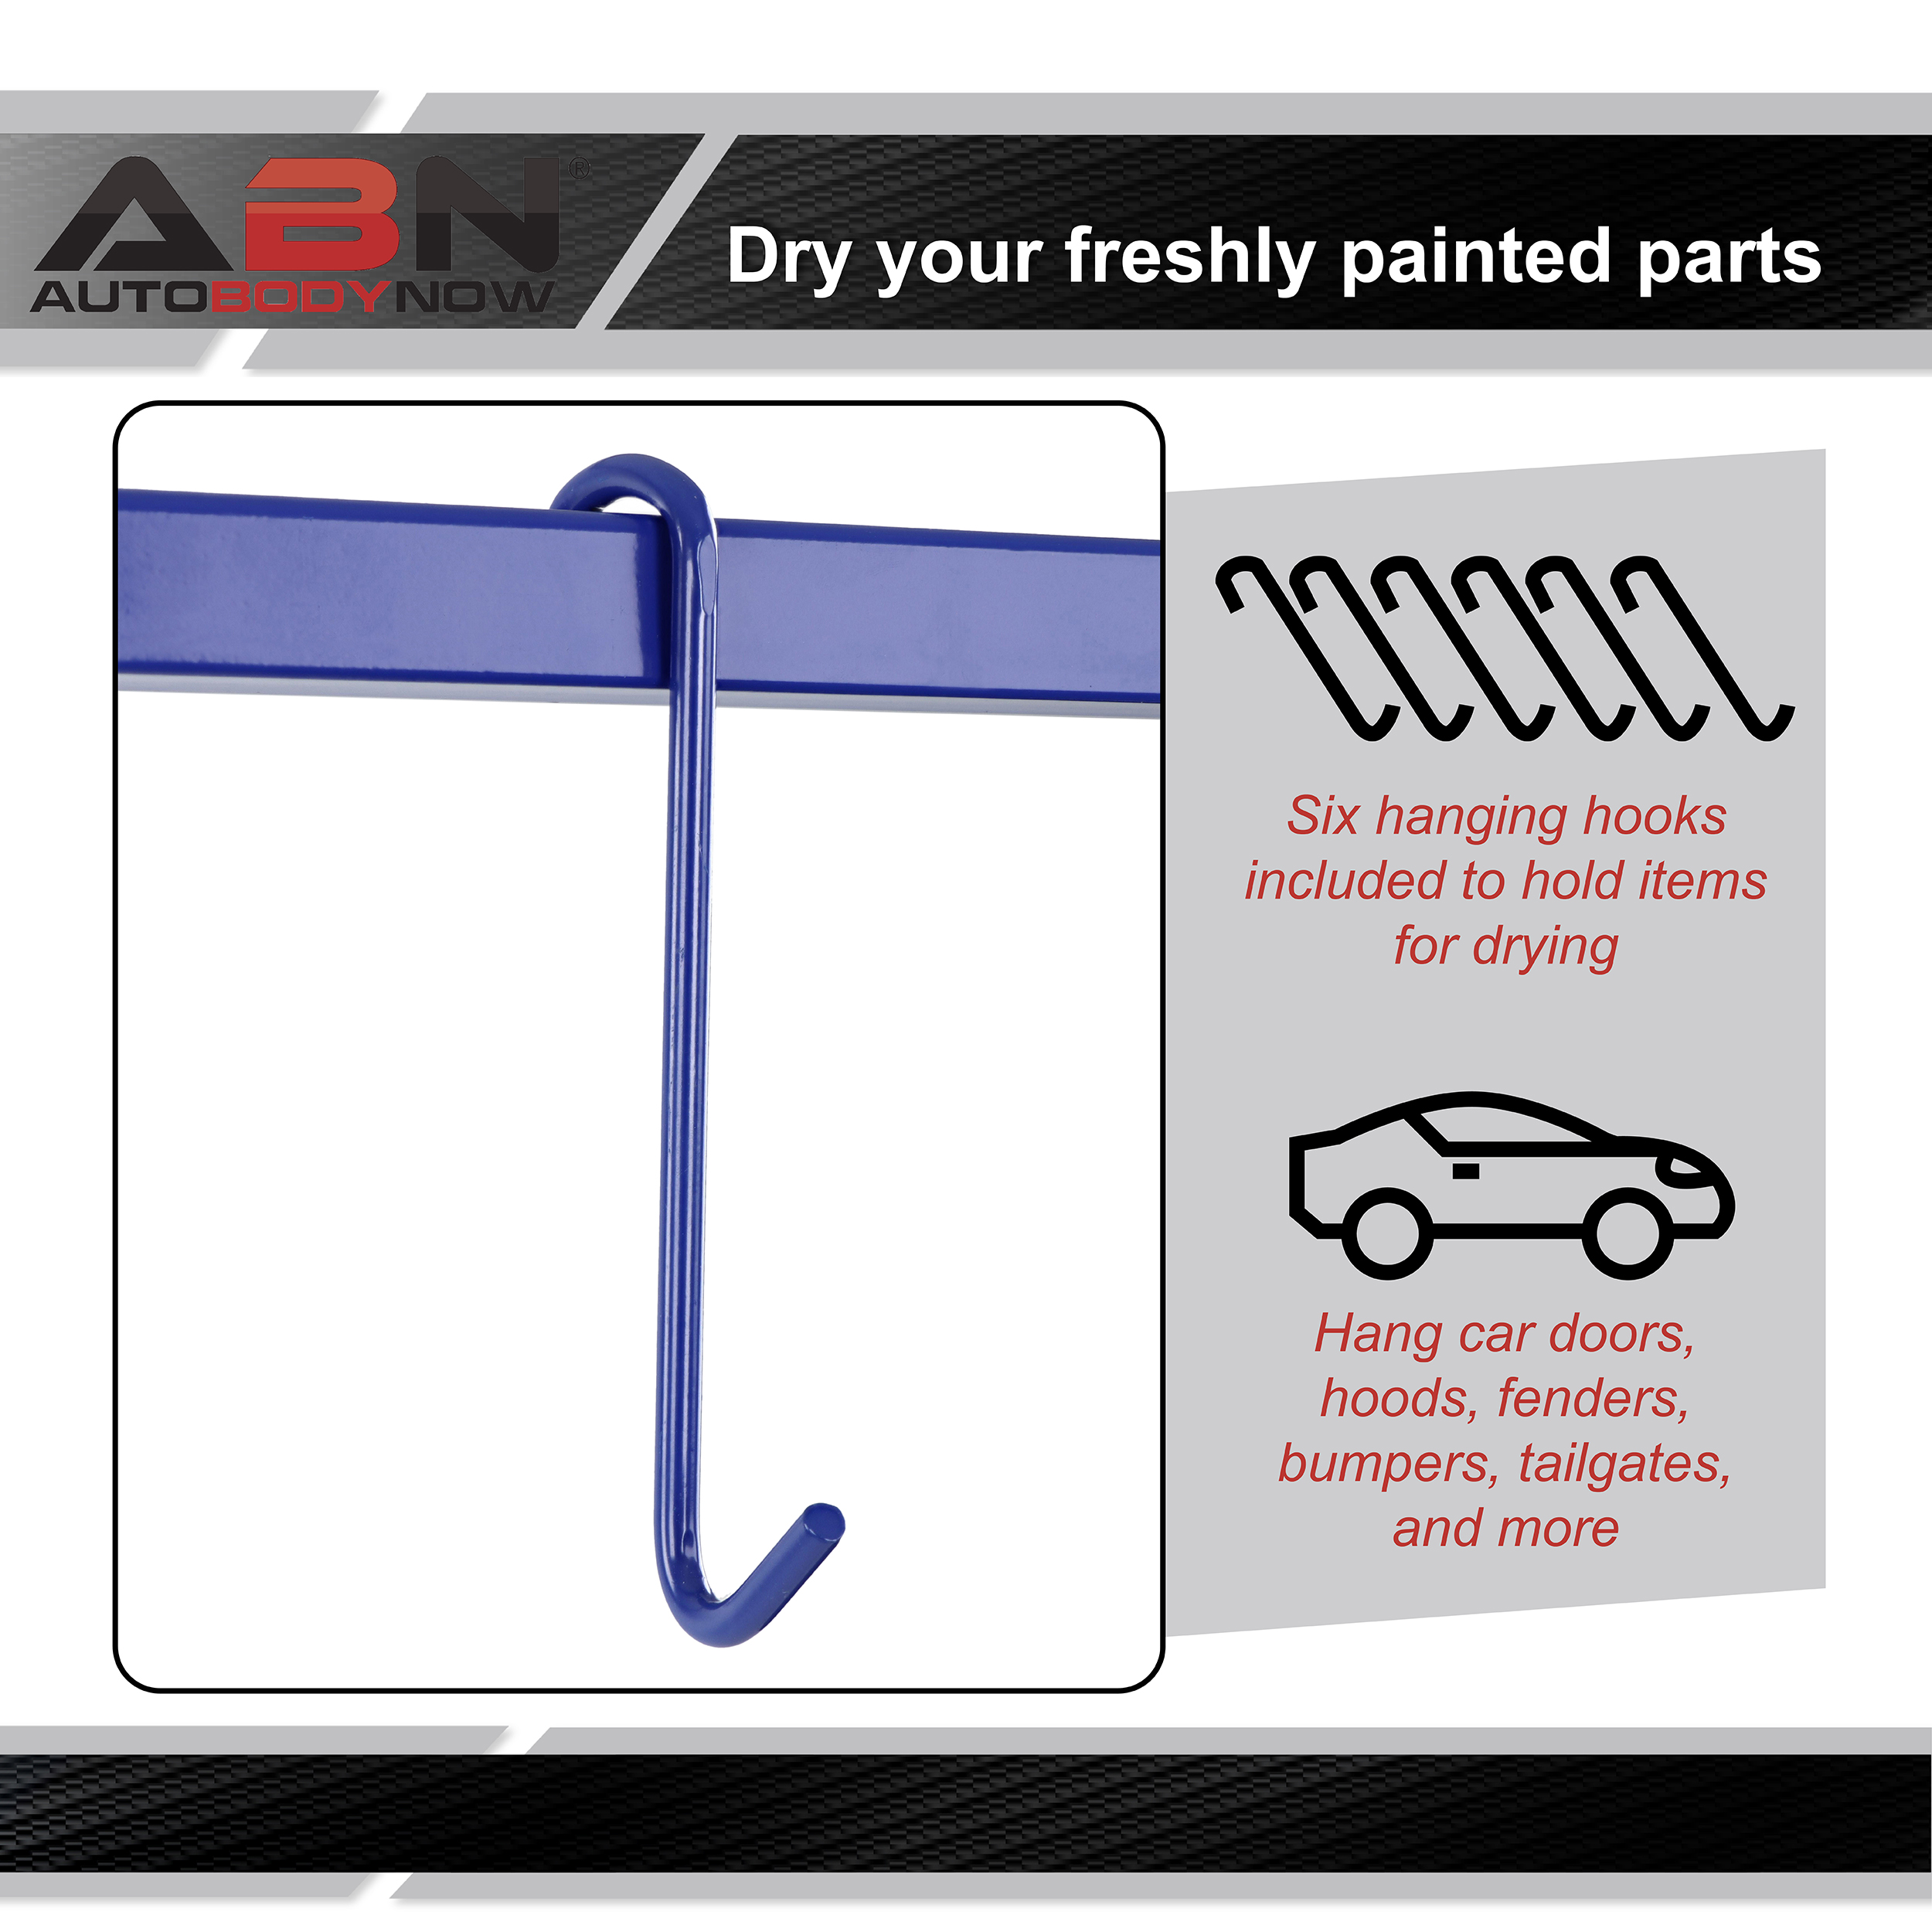 ABN Adjustable Foot Paint Hanger Extendable 50-70-Inch Painting Rack 